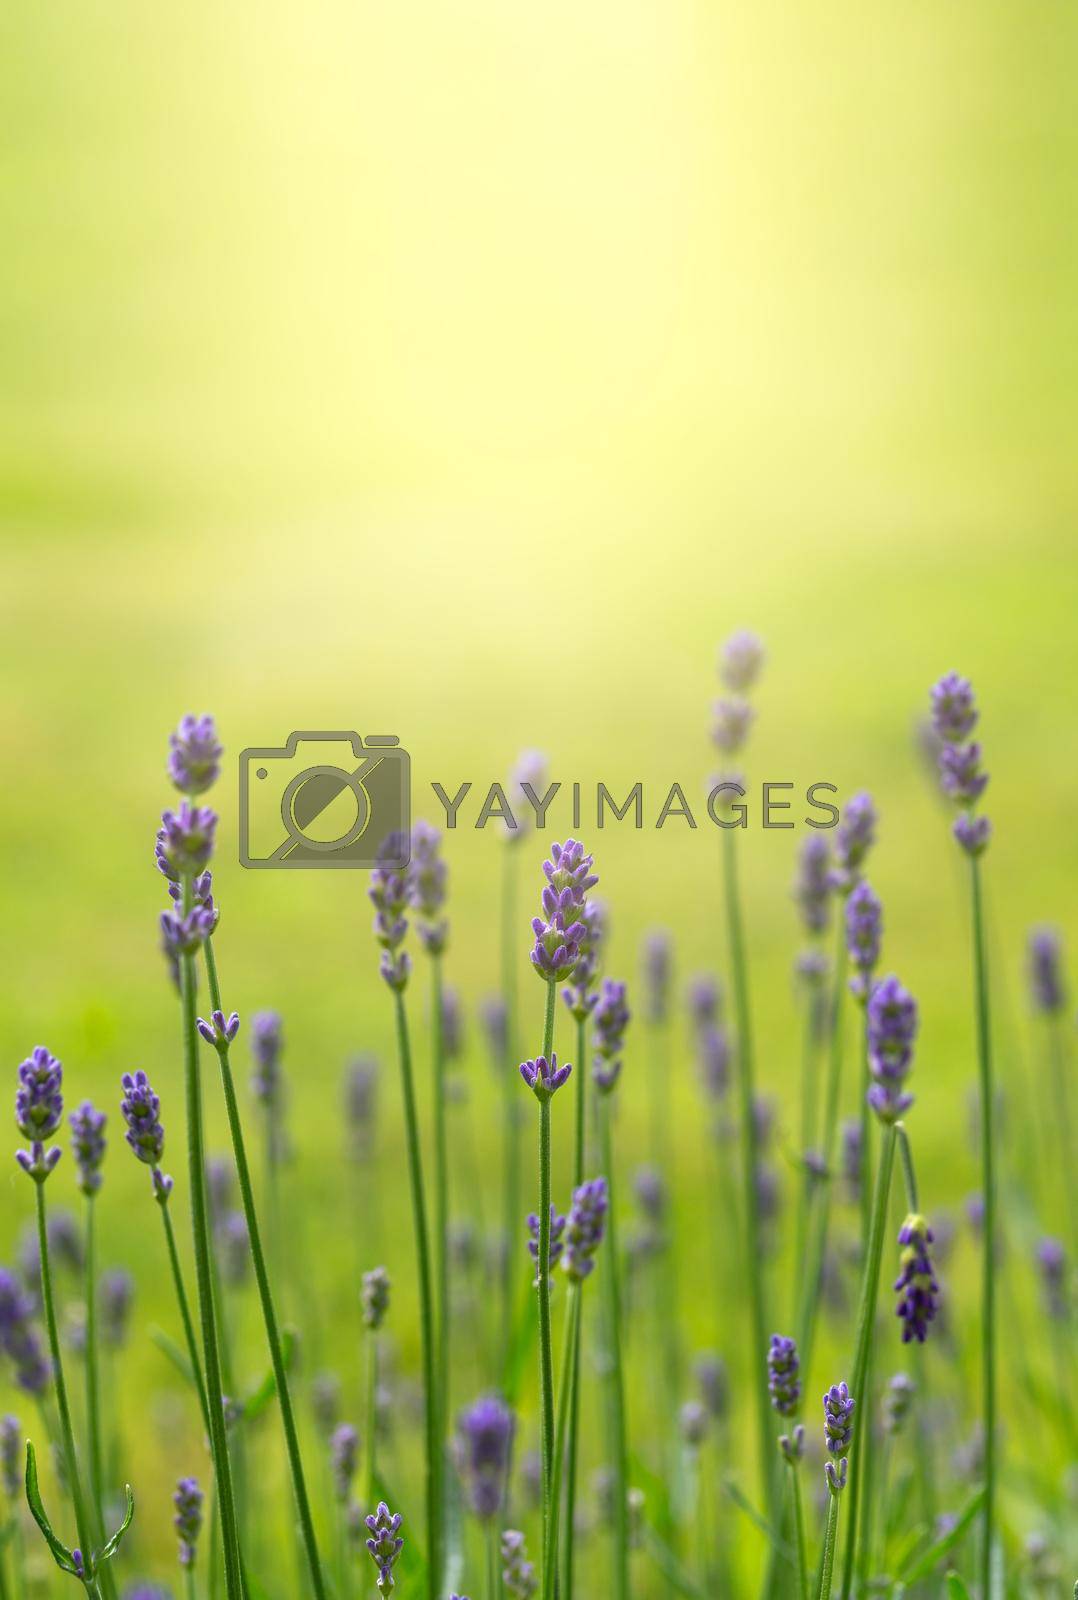 Royalty free image of Lavender flowers against blurry green background by Lana_M